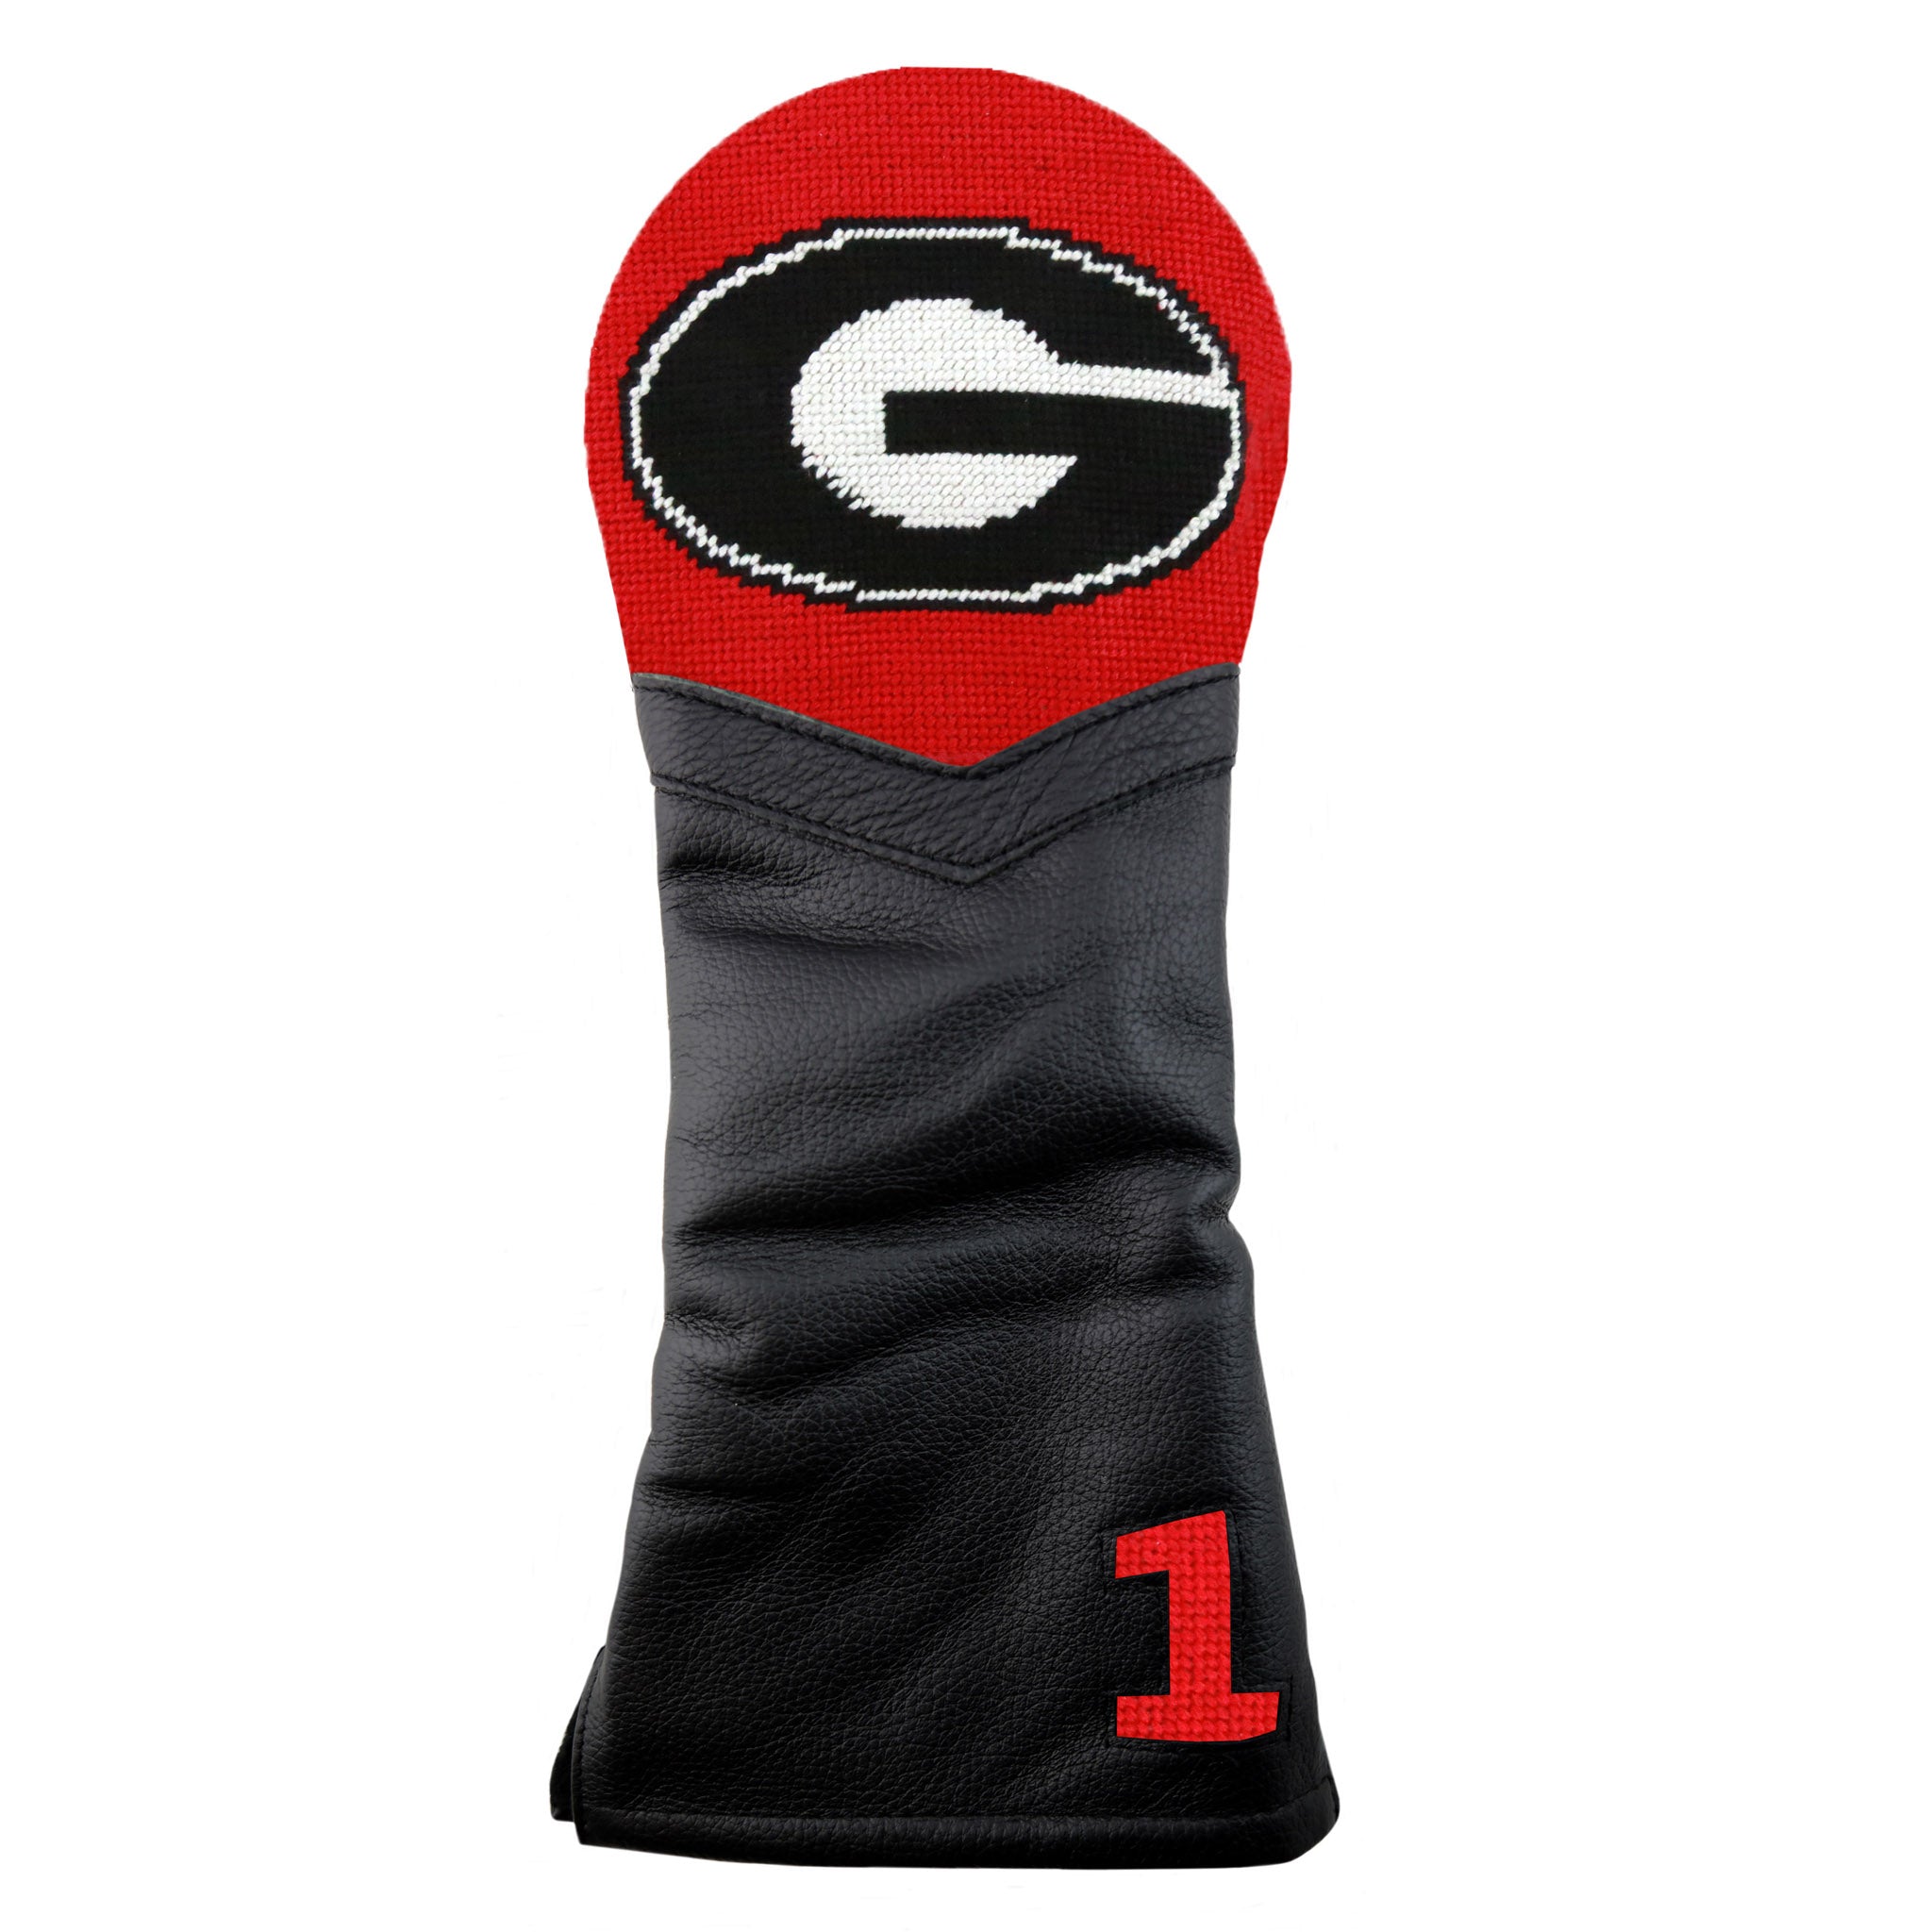 Georgia G Driver Headcover (Red) (Black Leather)